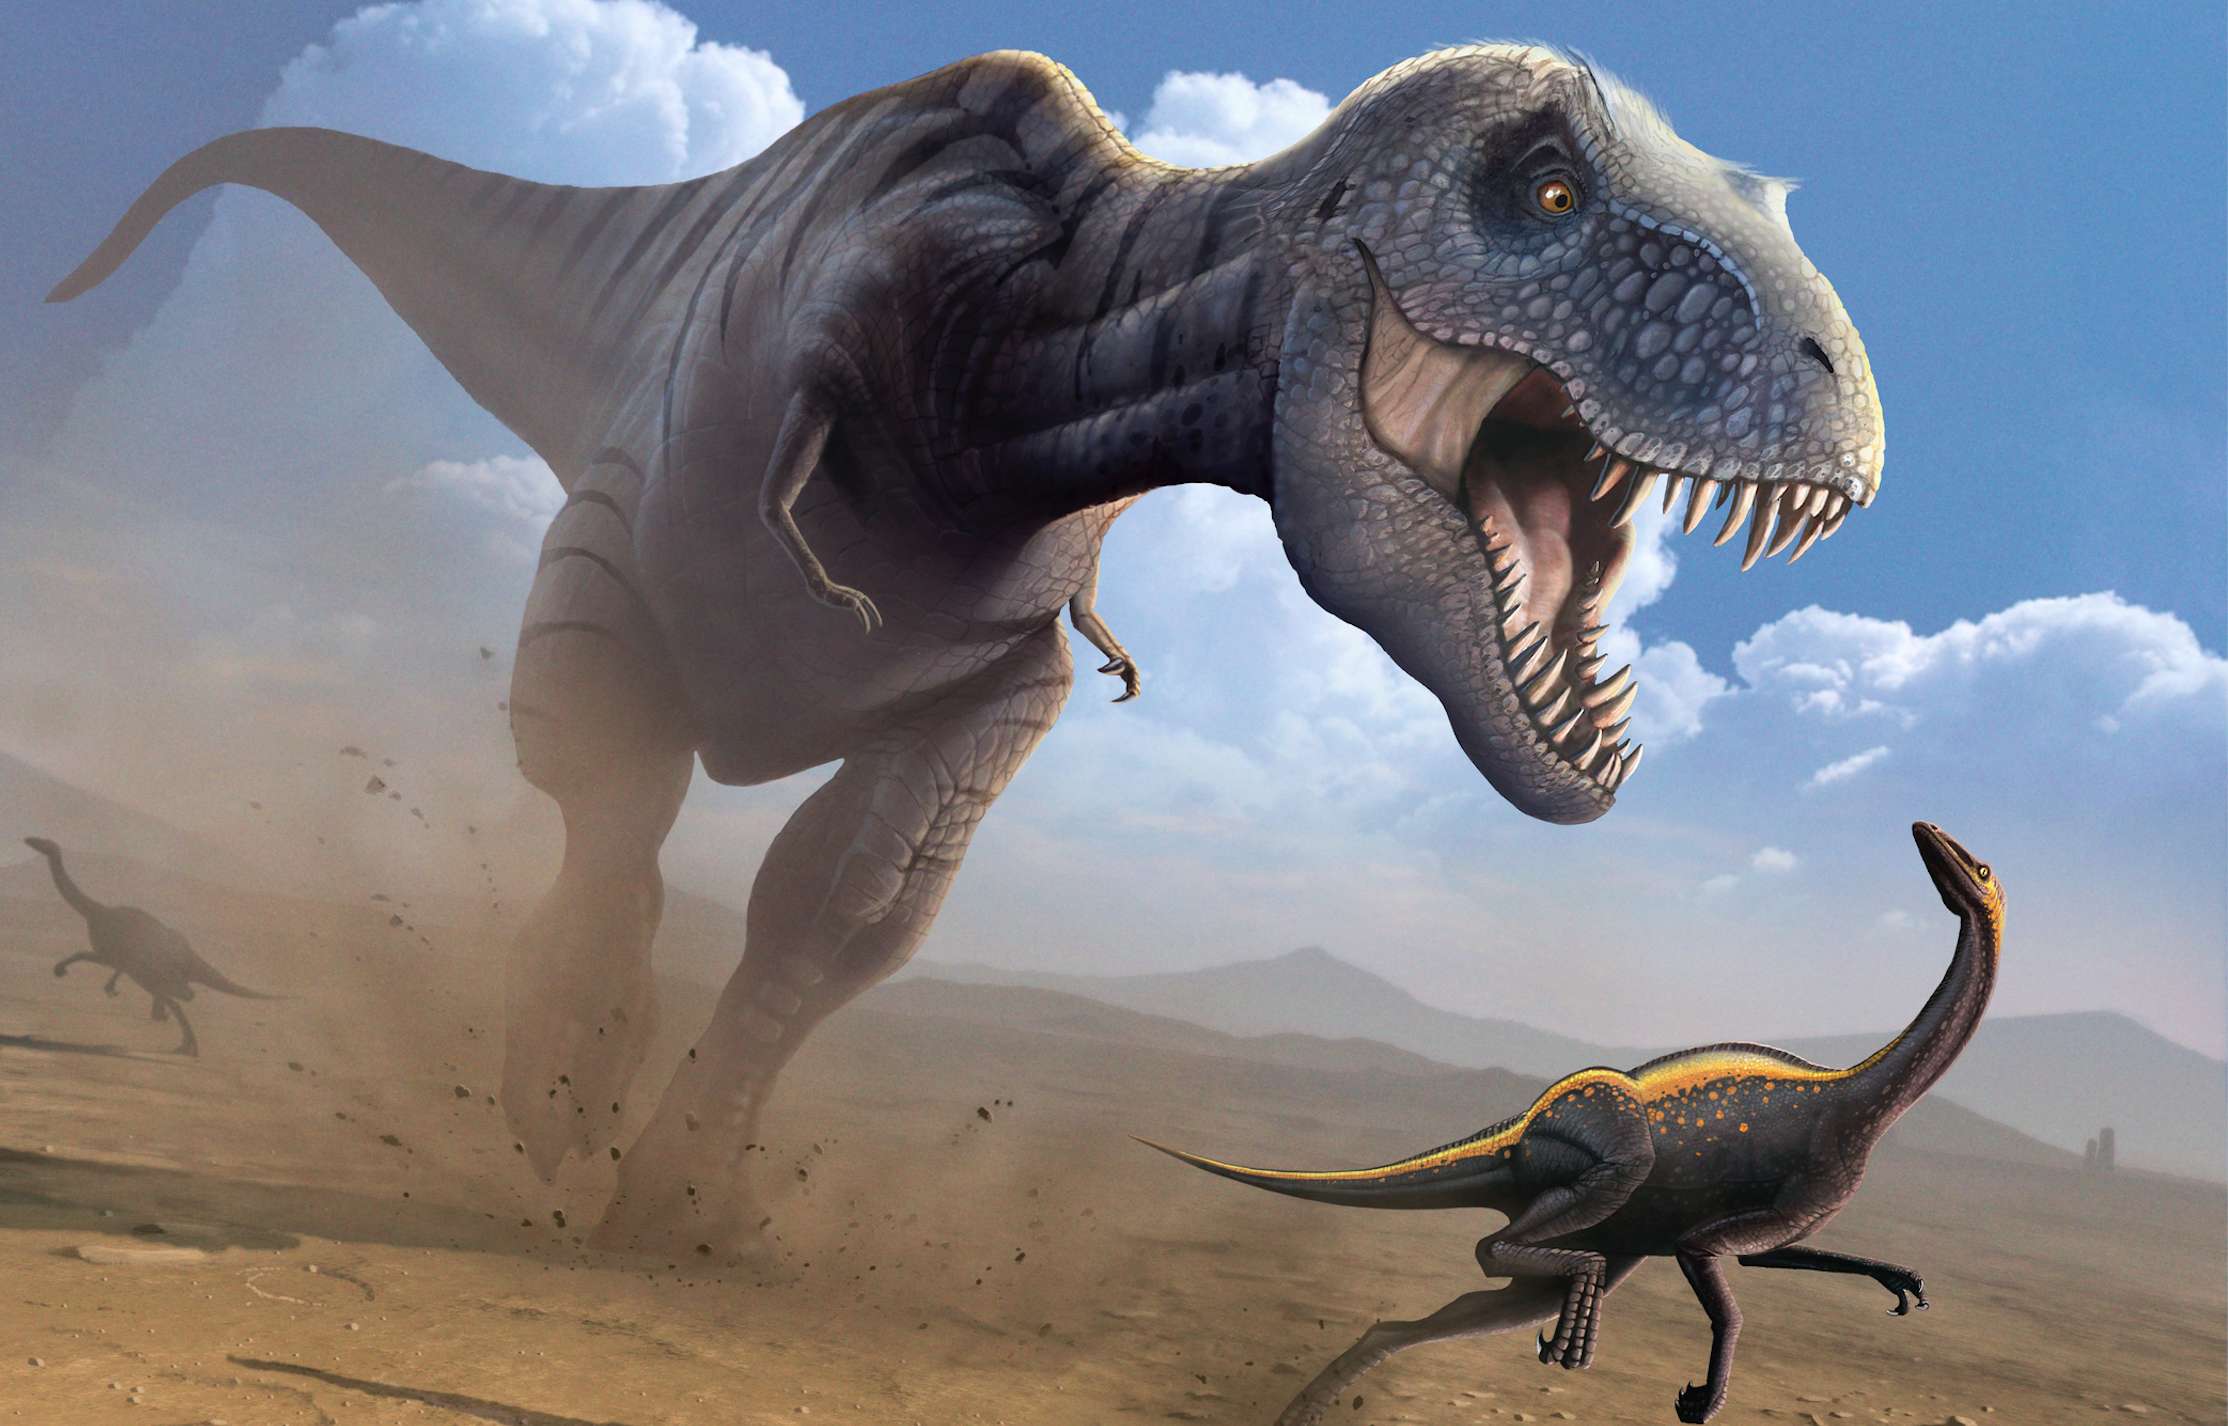 How Fast Did T. rex Run?' and other questions about dinosaurs examined in  new book